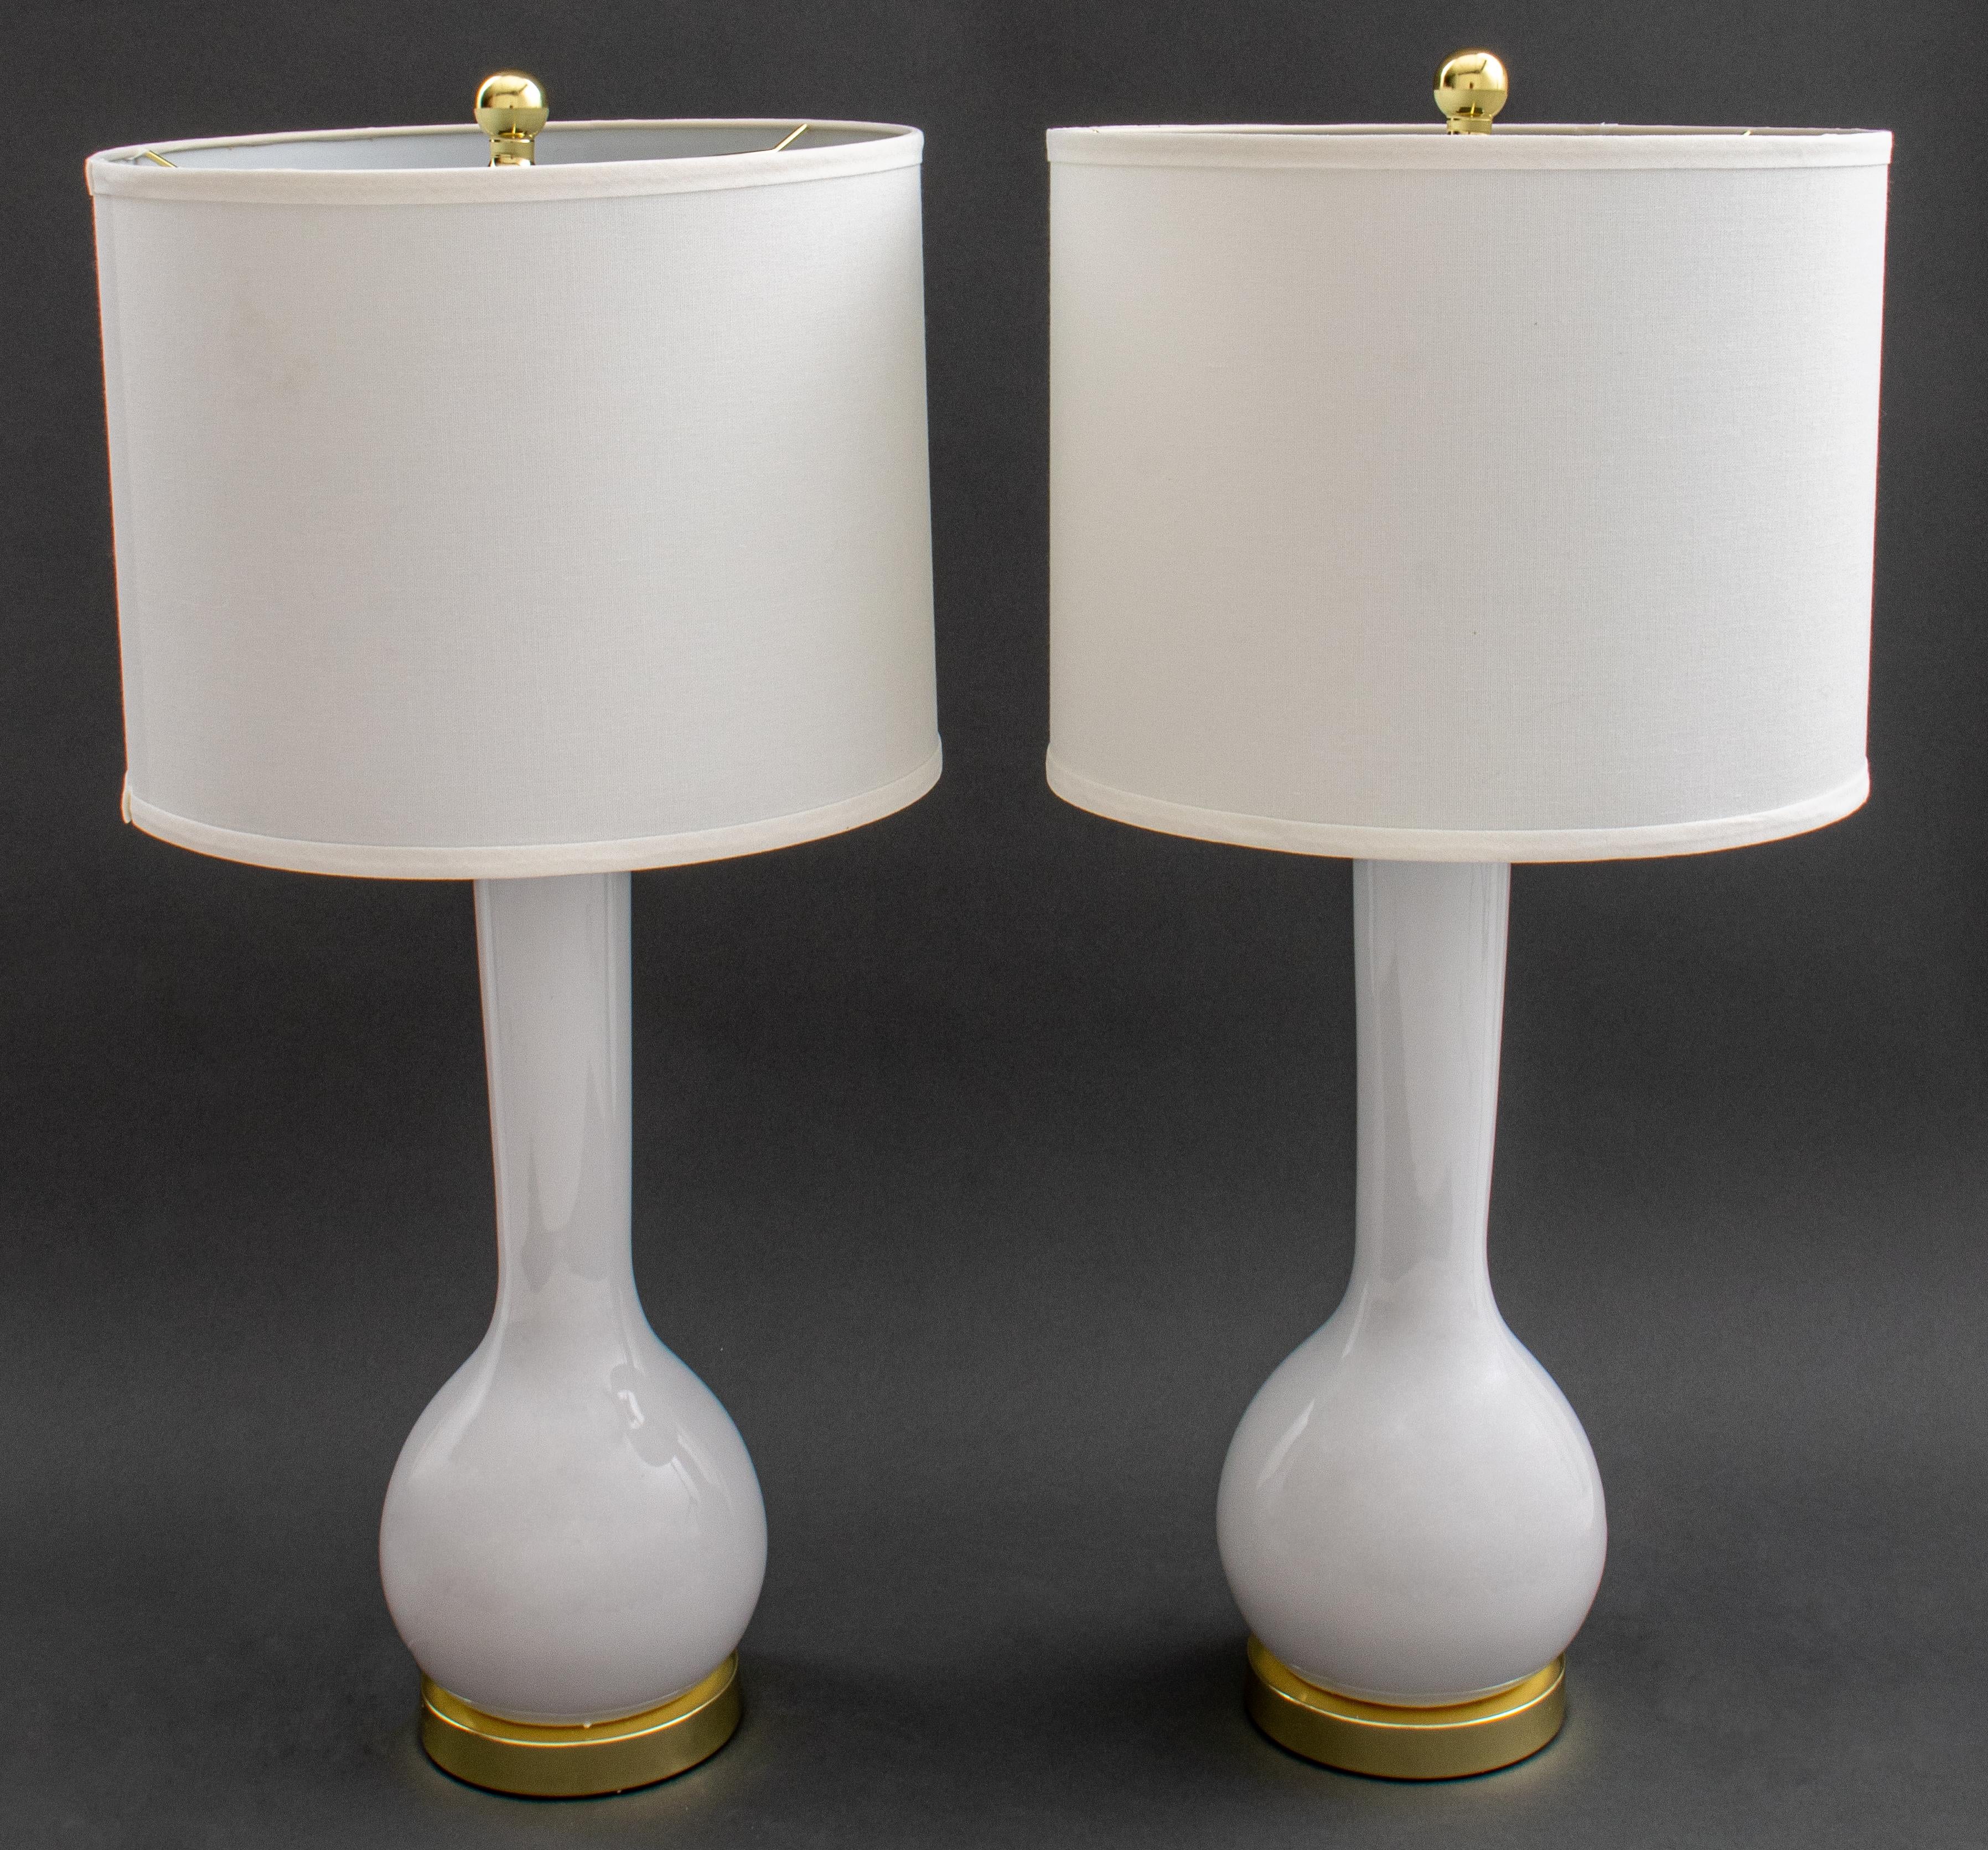 Pair of modern white porcelain bottle vase form lamps with gold-tone metal harps, circular bases, and finials, marked to undersides. 30.5